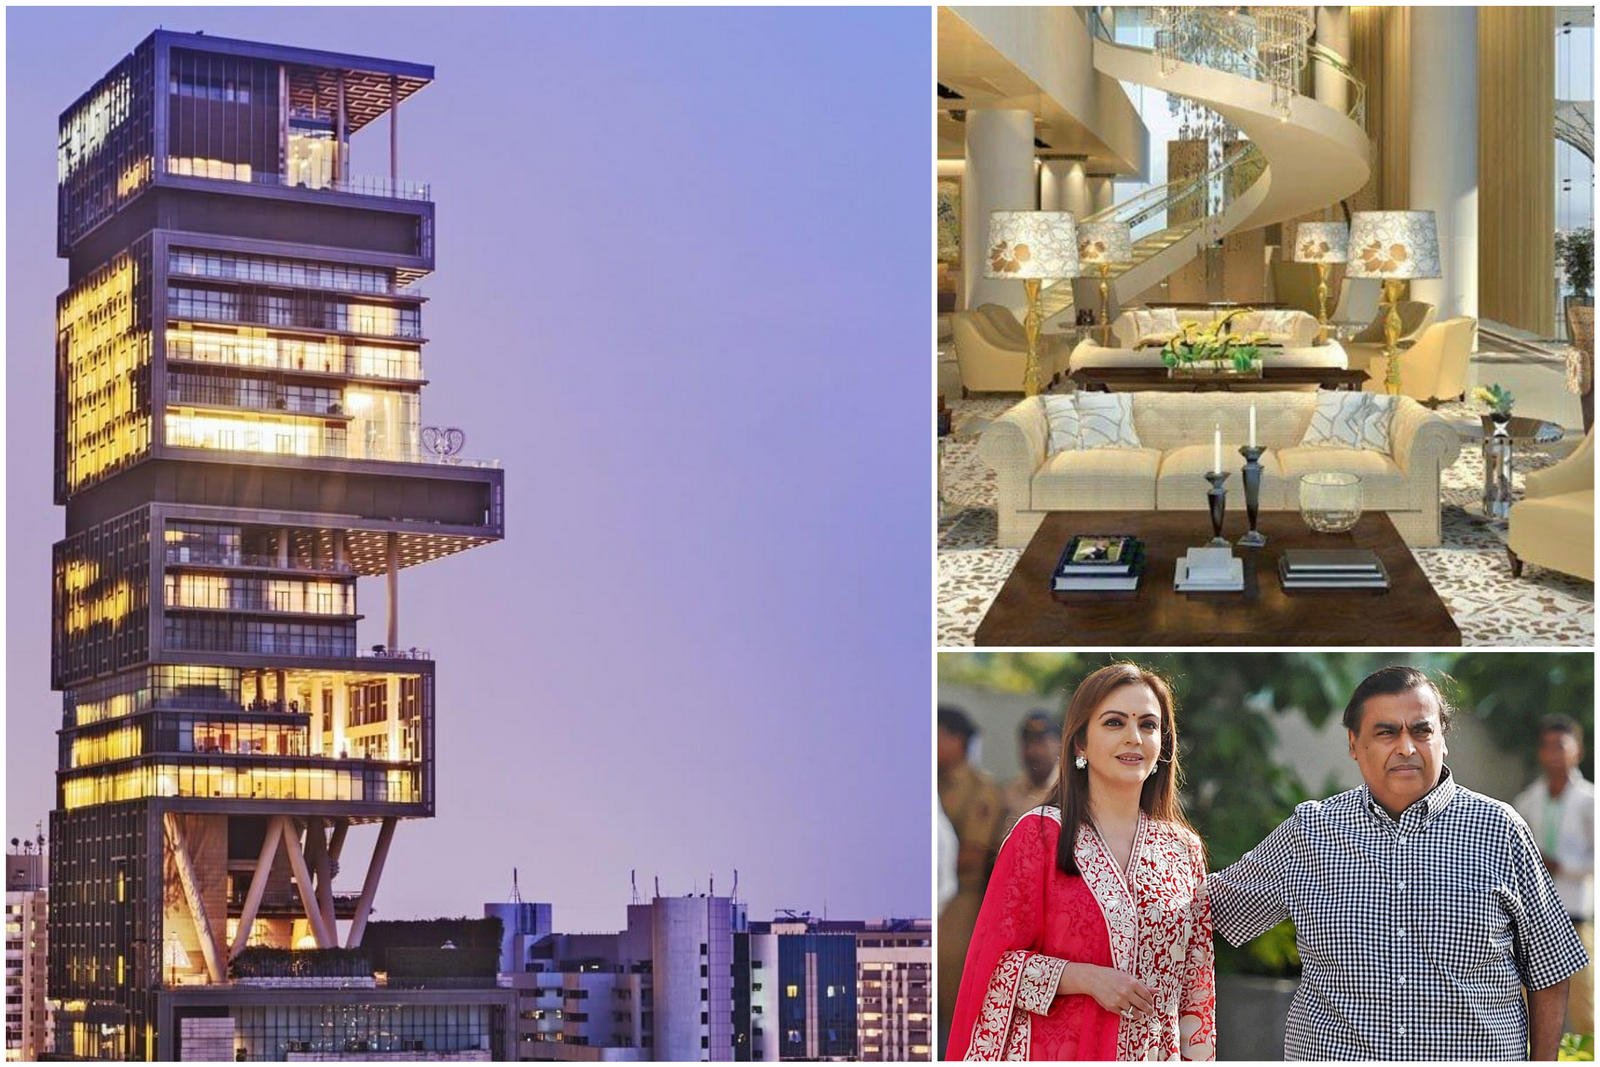 Almost twice as tall as Big Ben, Indian billionaire Mukesh Ambani’s $4.6 billion 27-story skyscraper home has a snow room whose walls blow artificial snowflakes to beat the heat. Antilia even has a mammoth 80-seater home theater with snack and wine-tasting rooms.